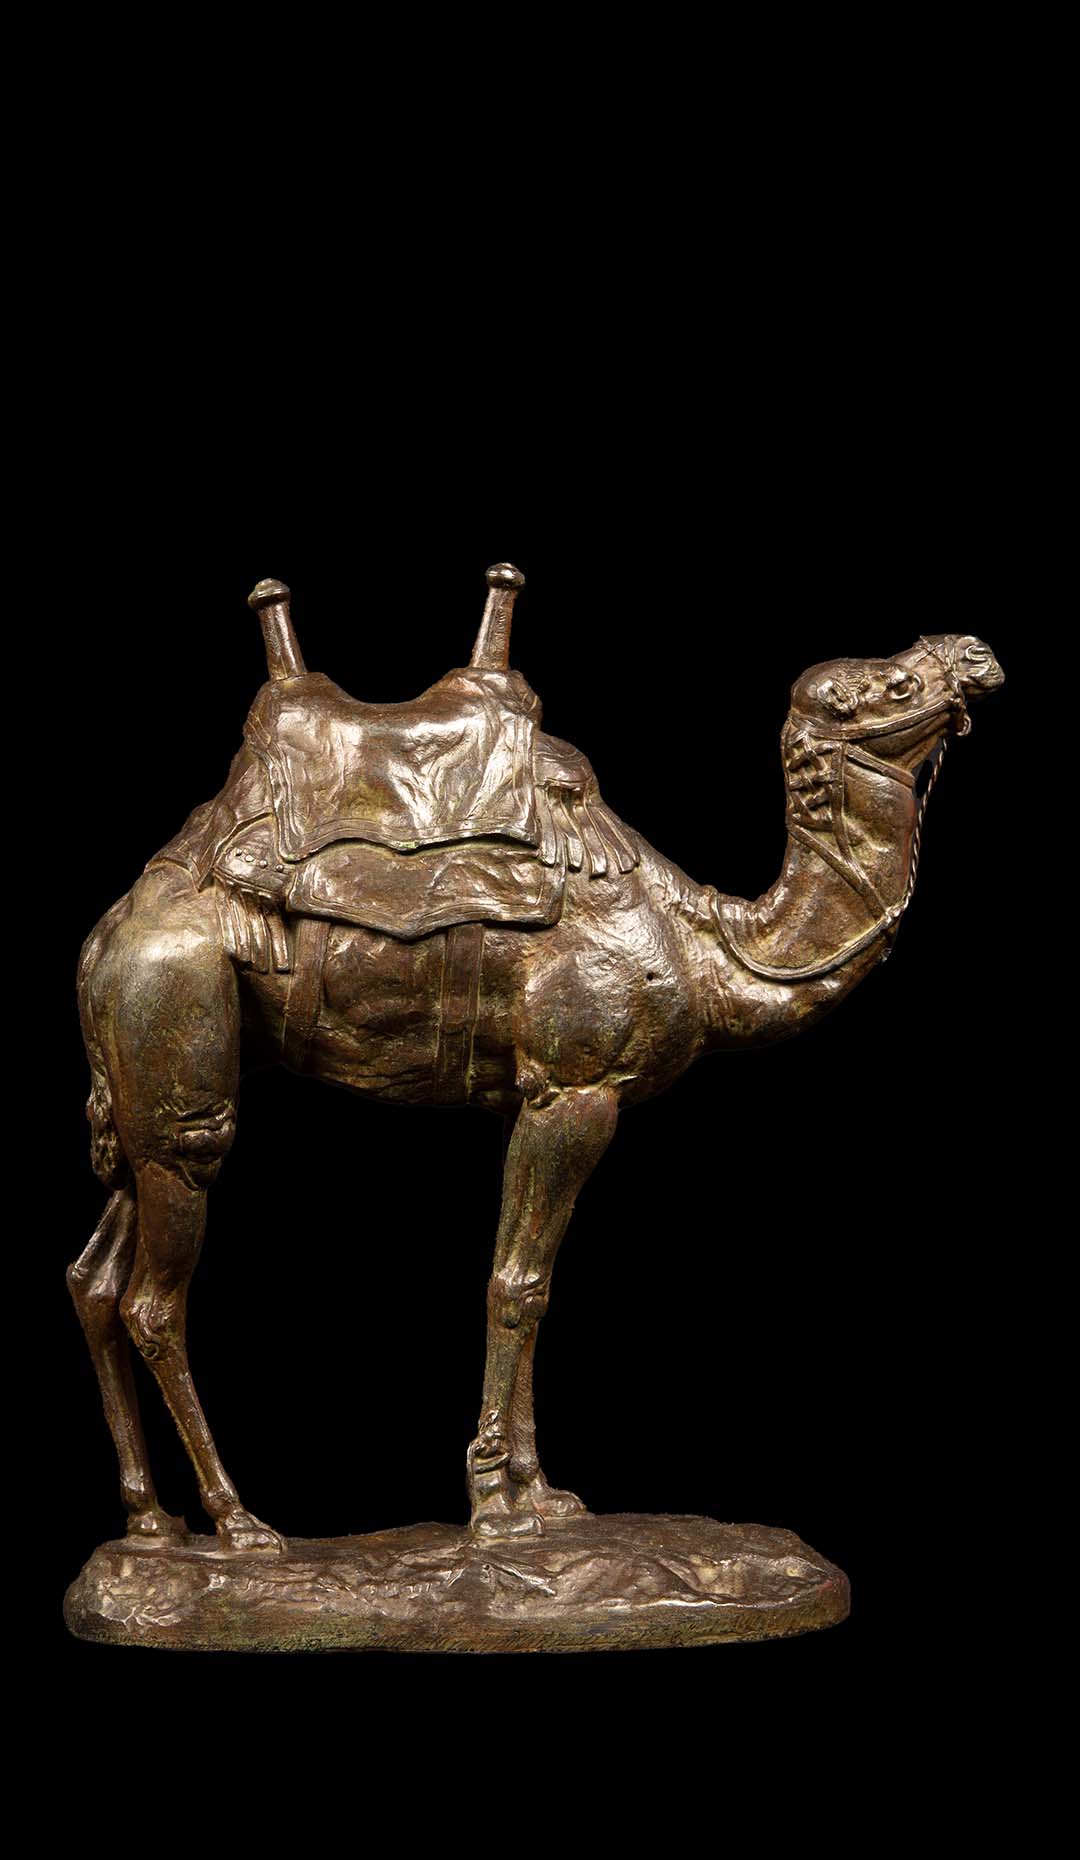 Saddled camel By Alfred Barye (1839-1882) in Bronze